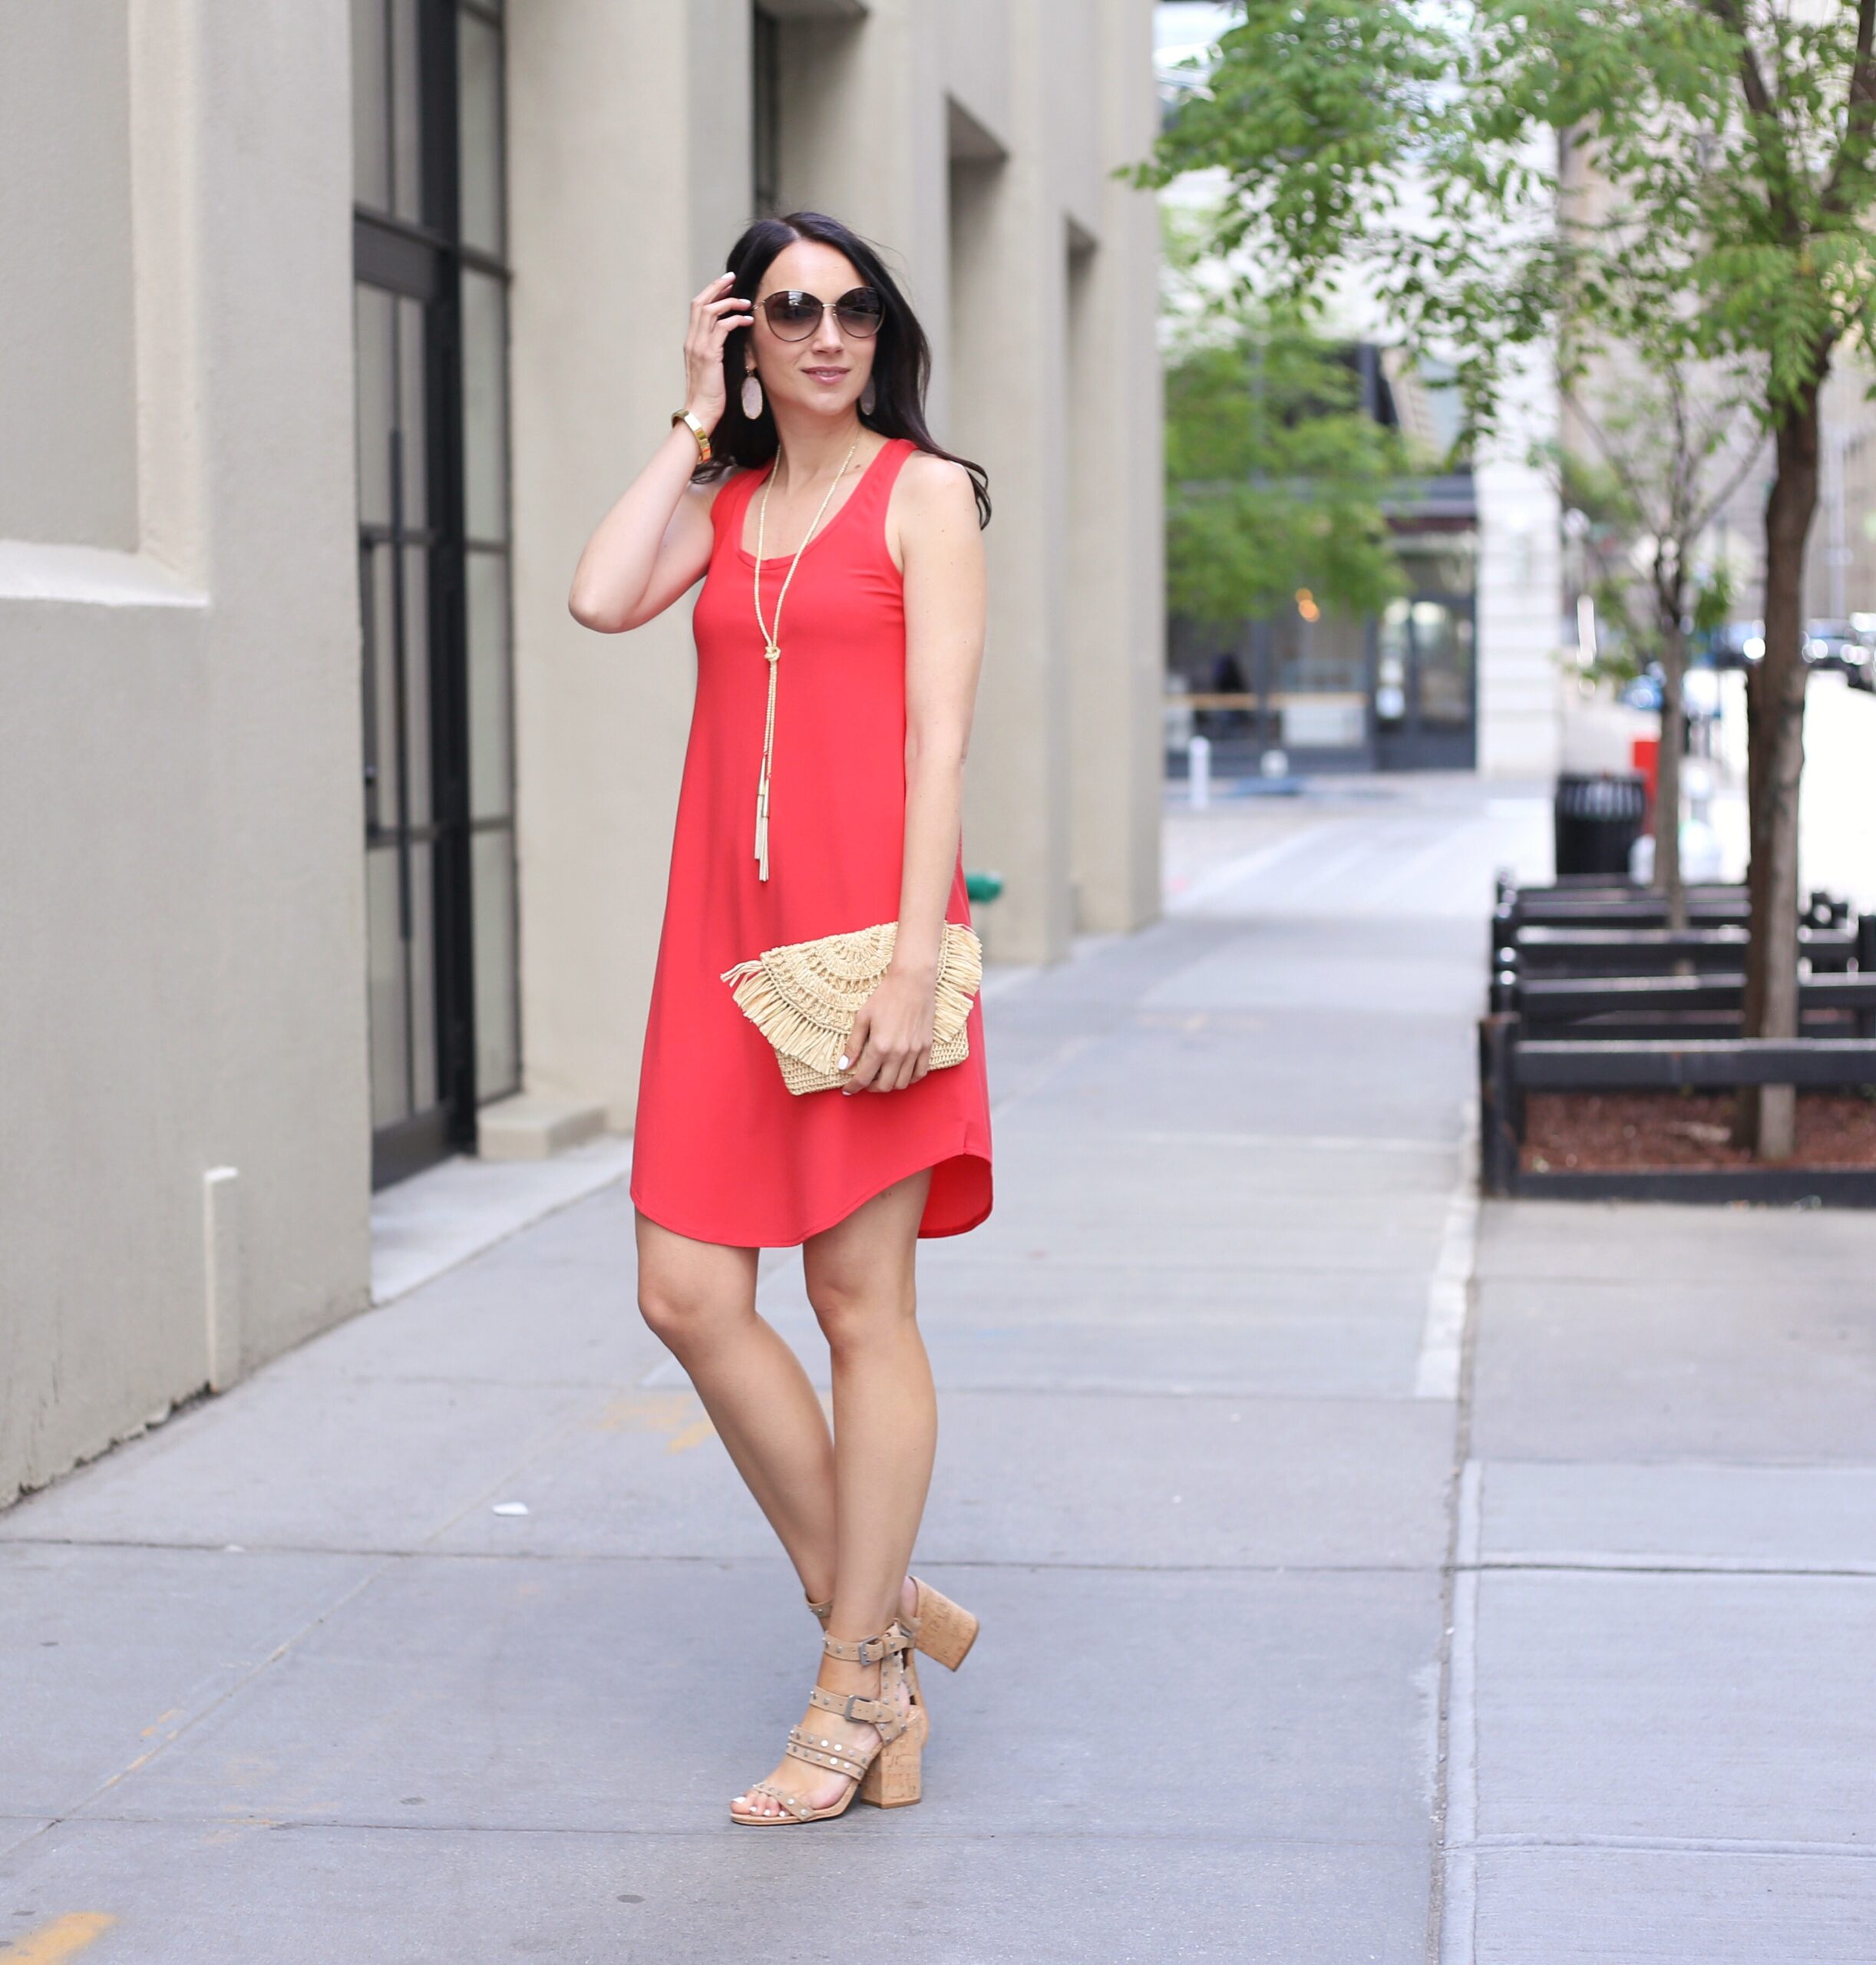 blogger Anna Monteiro wearing Leith tank dress Dolce Vita block heel cork sandals and Tom Ford sunglasses from Nordstrom